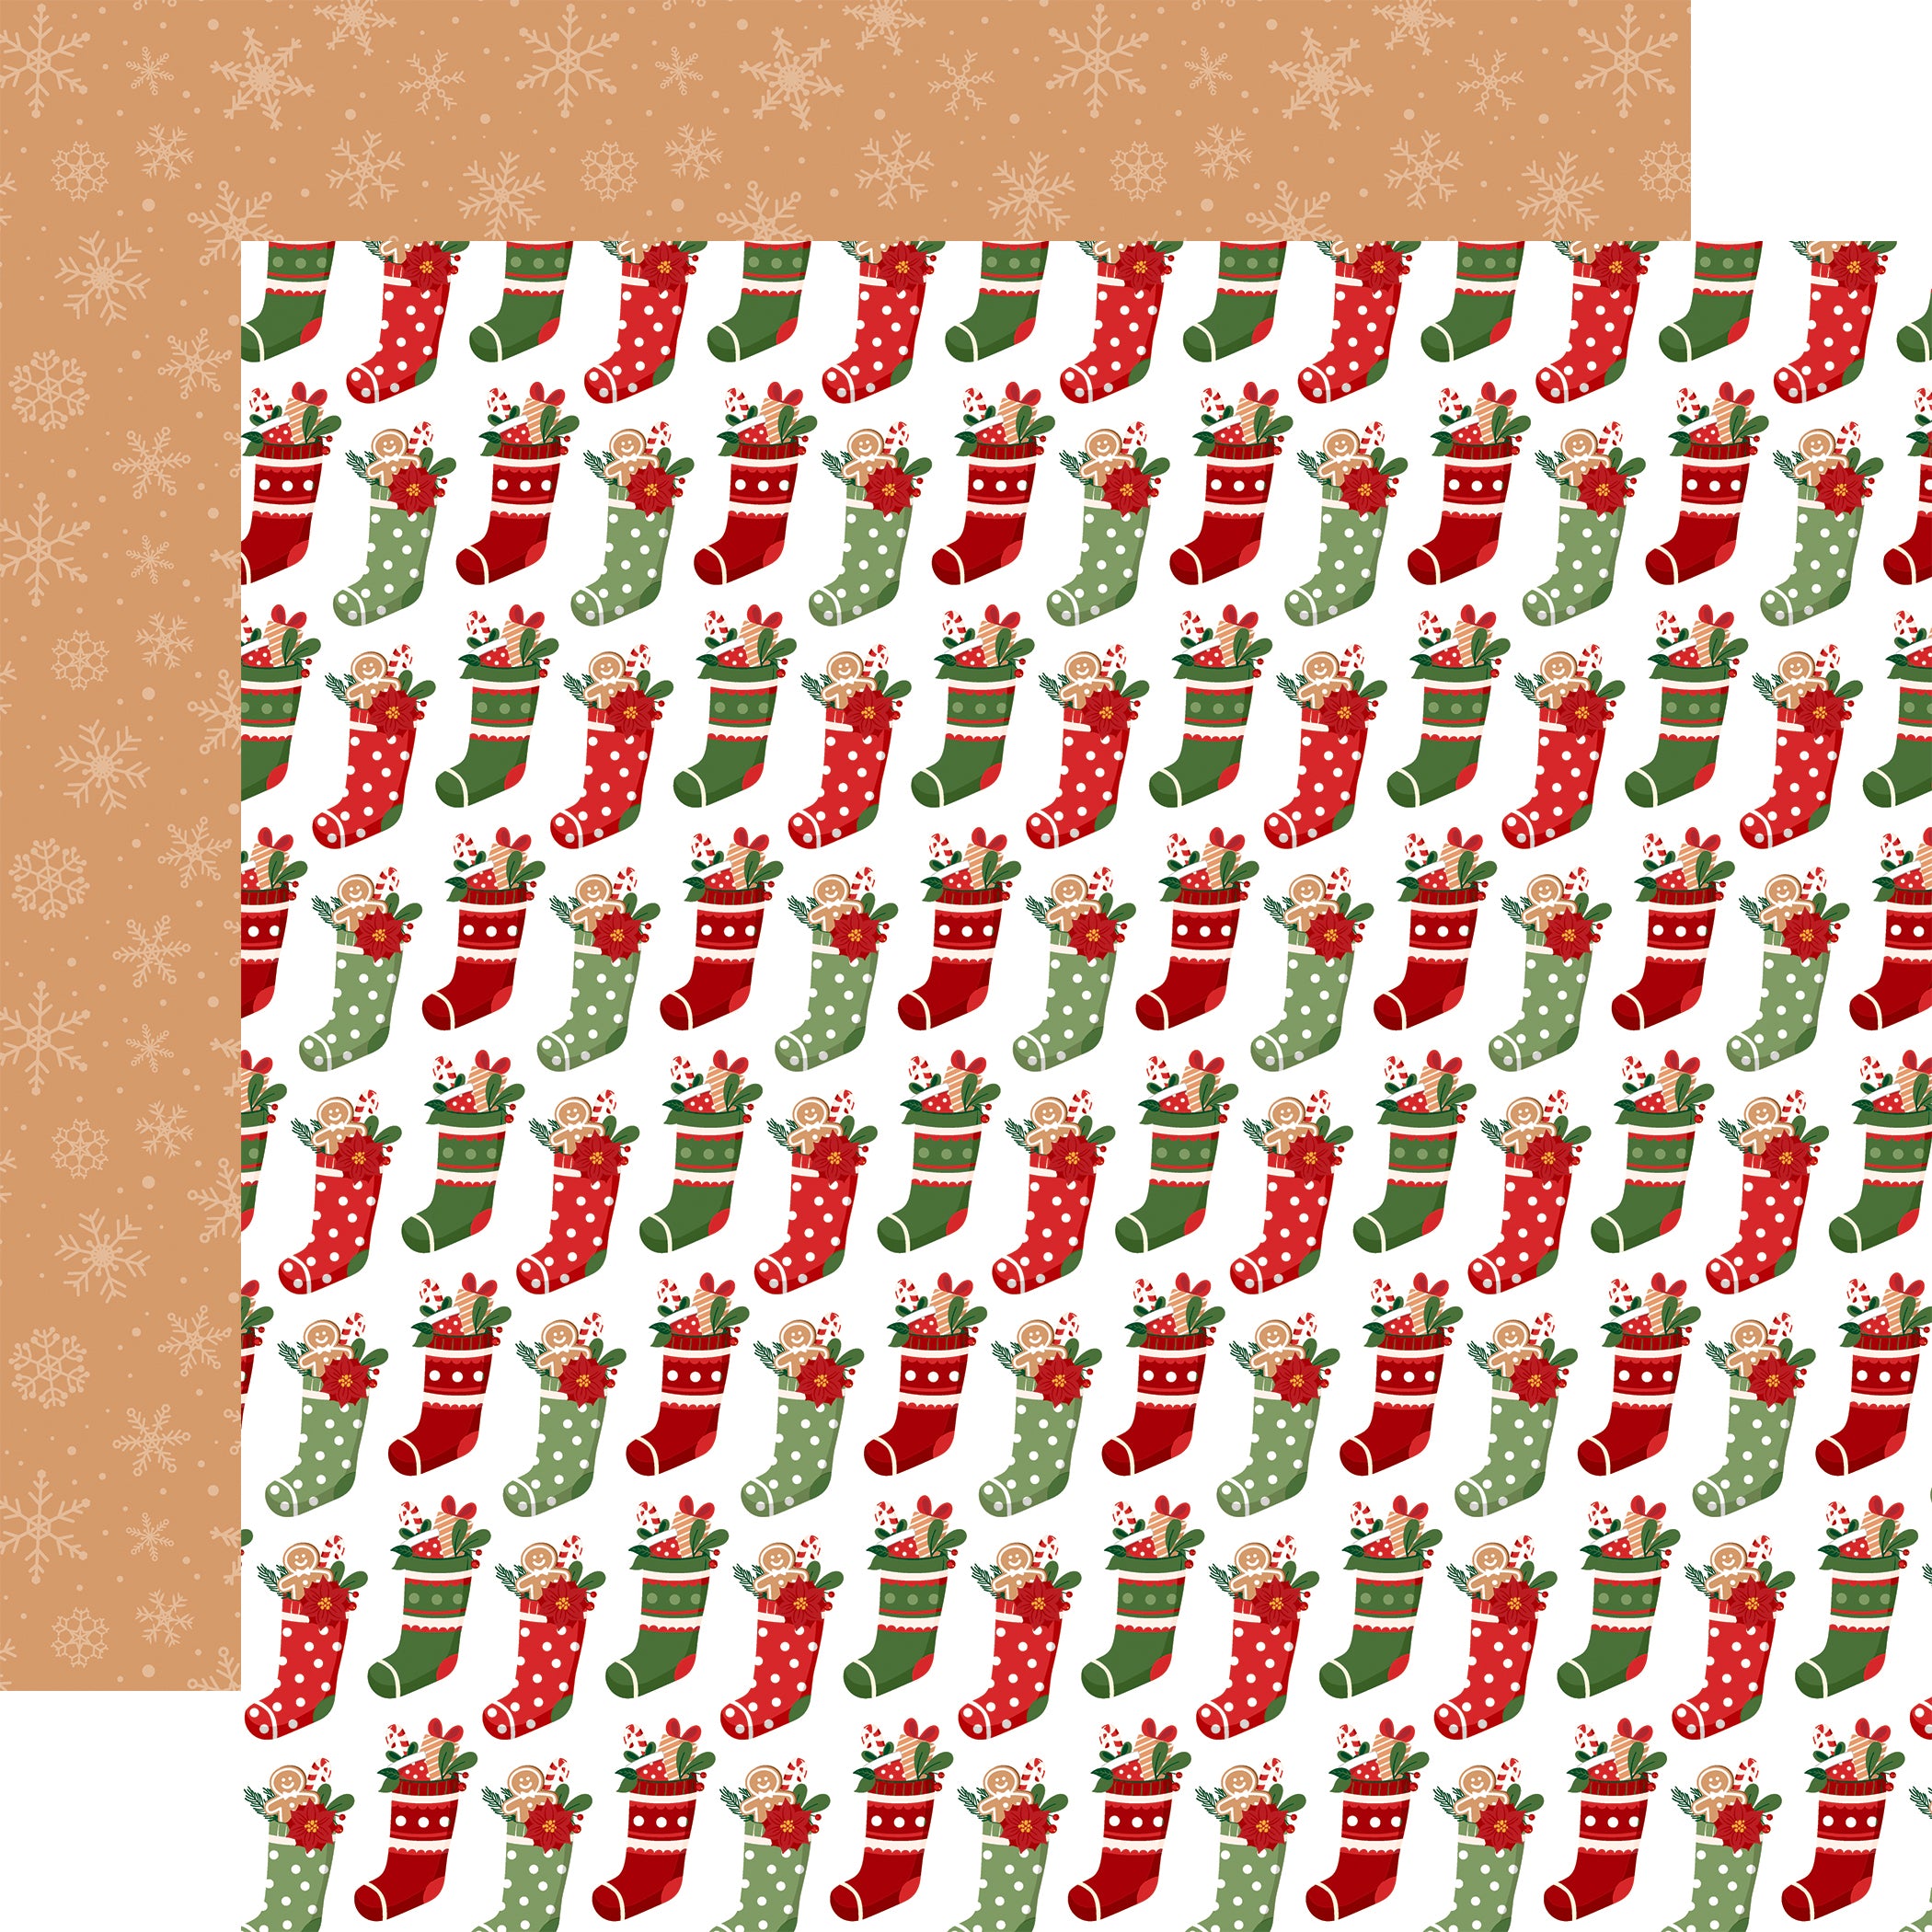 Have A Holly Jolly Christmas Collection Cookie Stockings 12 x 12 Double-Sided Scrapbook Paper by Echo Park Paper